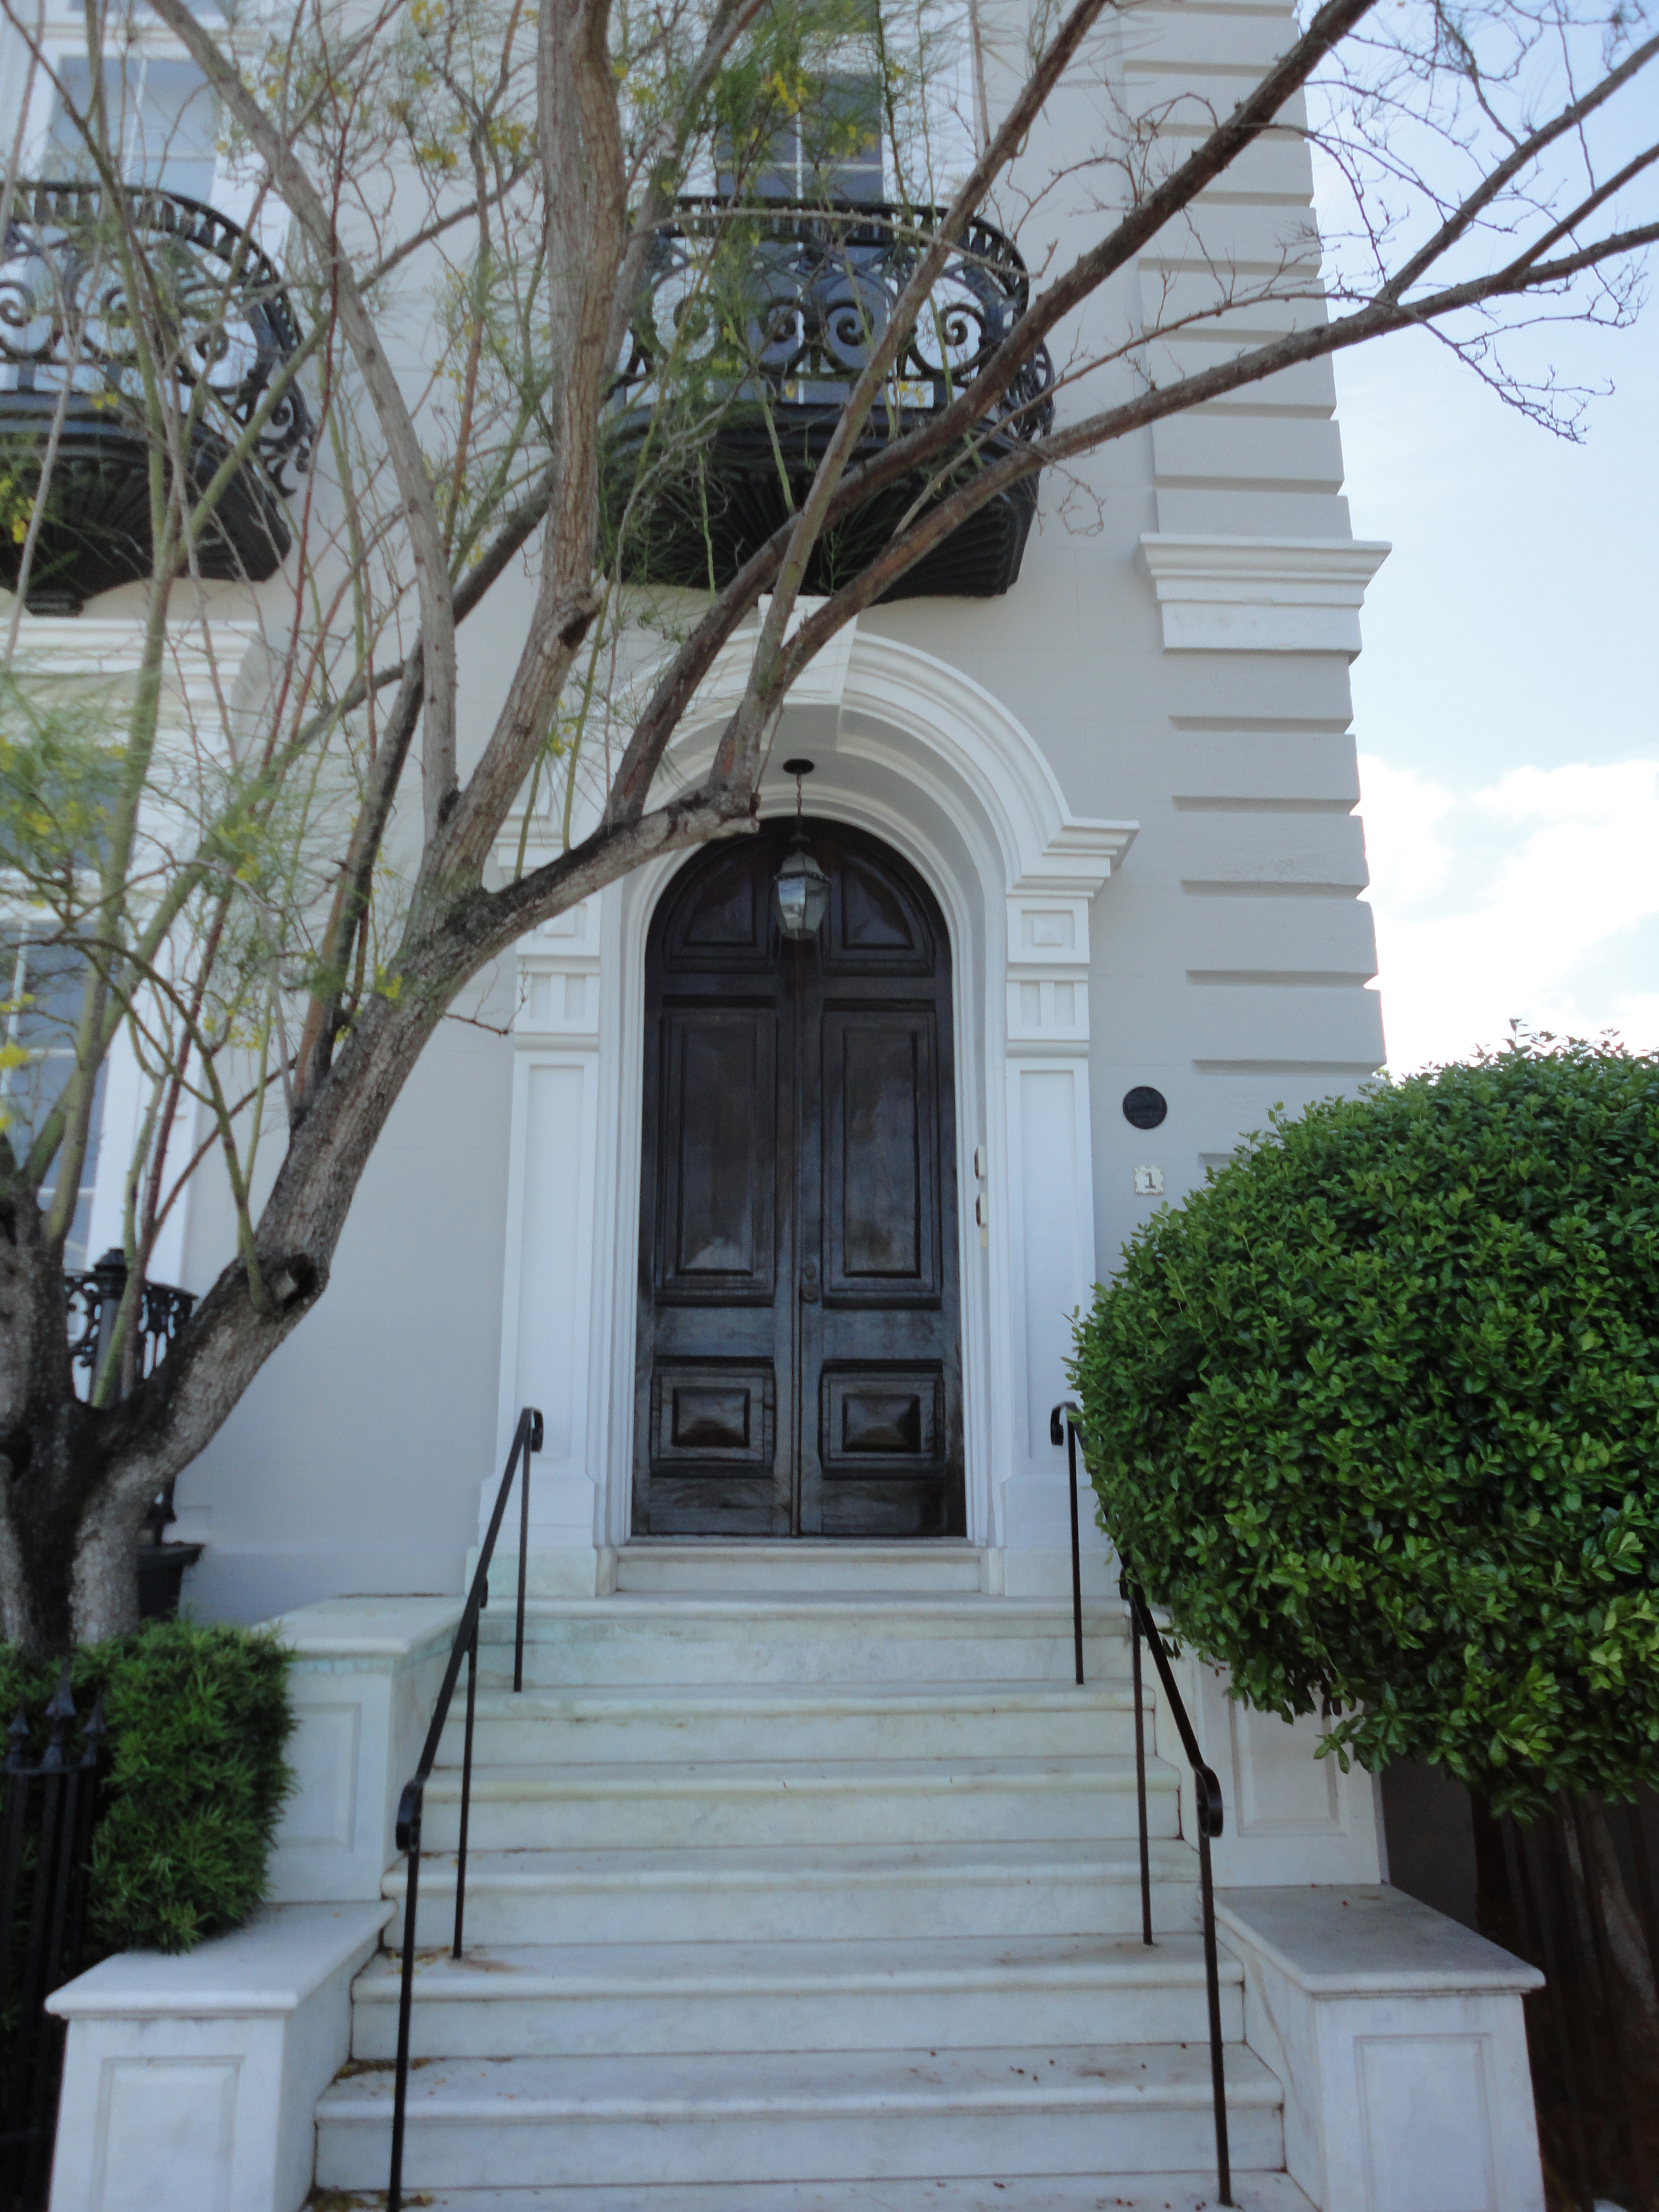 Lovely arched front door to a historic home in Charleston, South Carolina